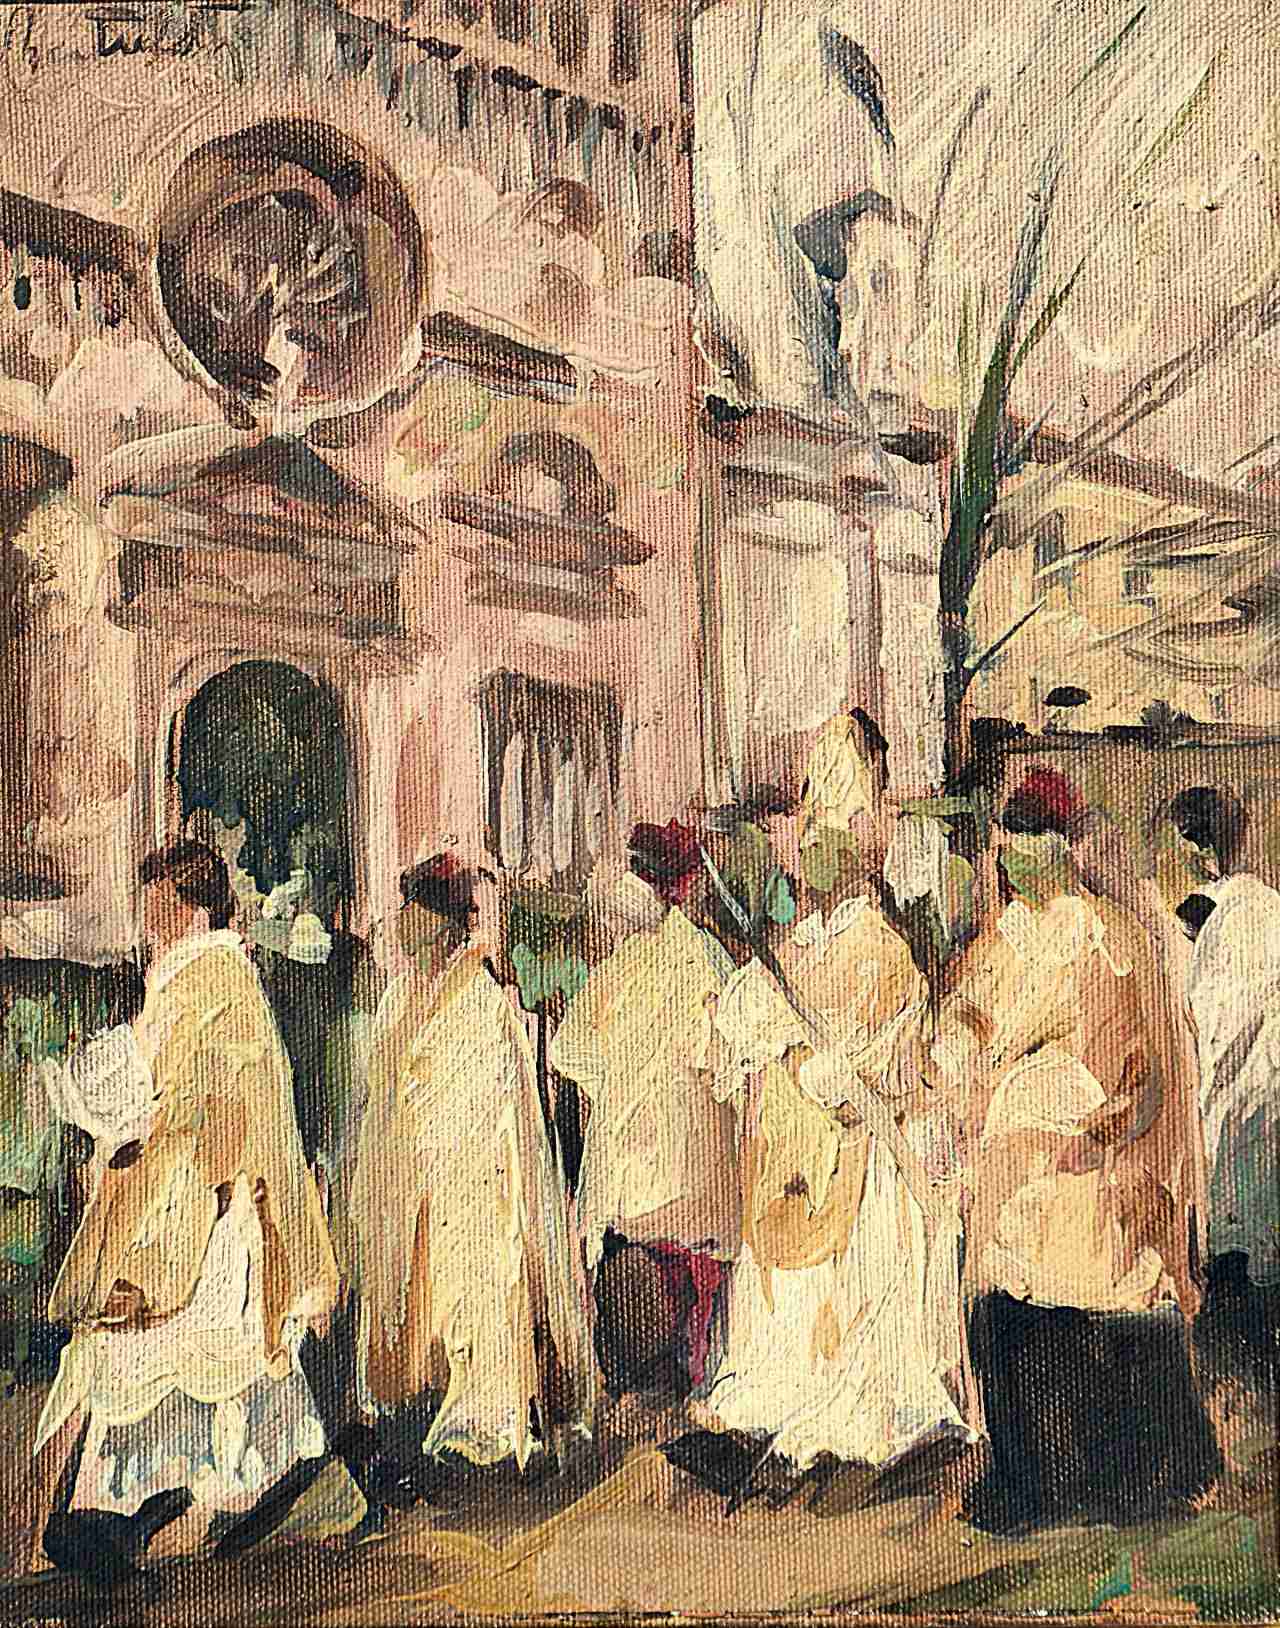 Procession of the palms 1972